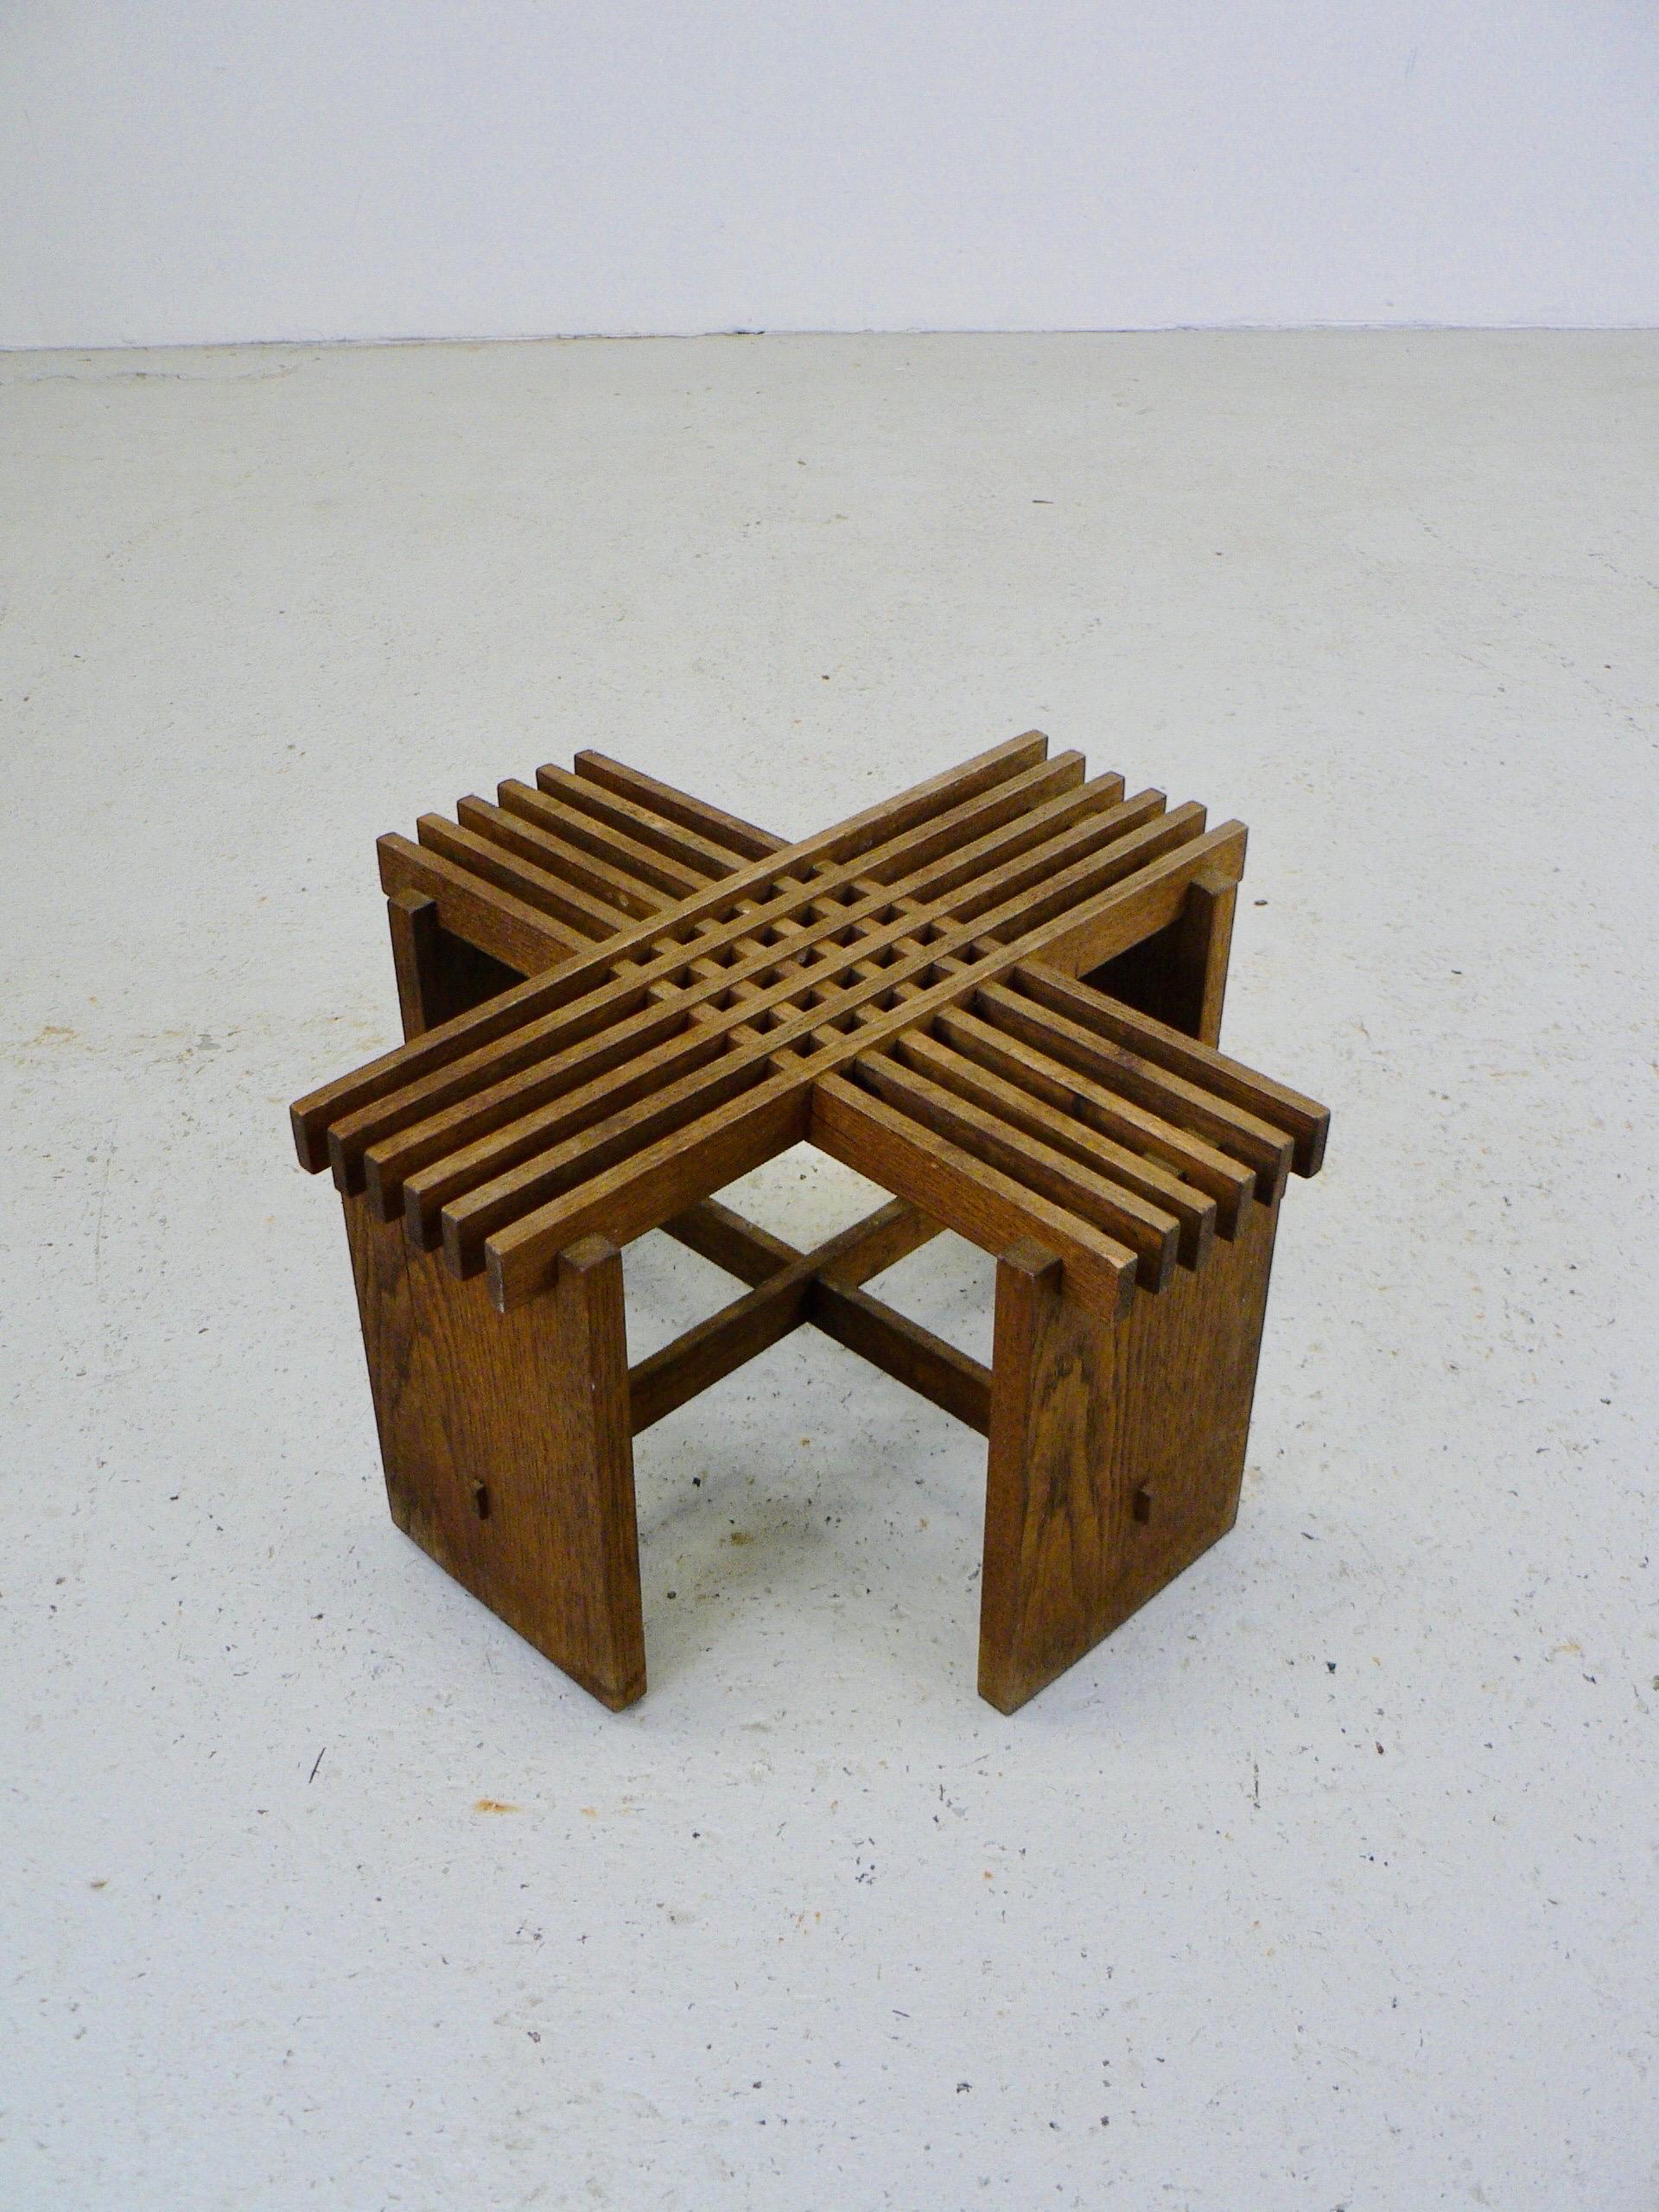 Arts and Crafts A solid oak stool or footrest - Art & crafts - 1930 - France. For Sale